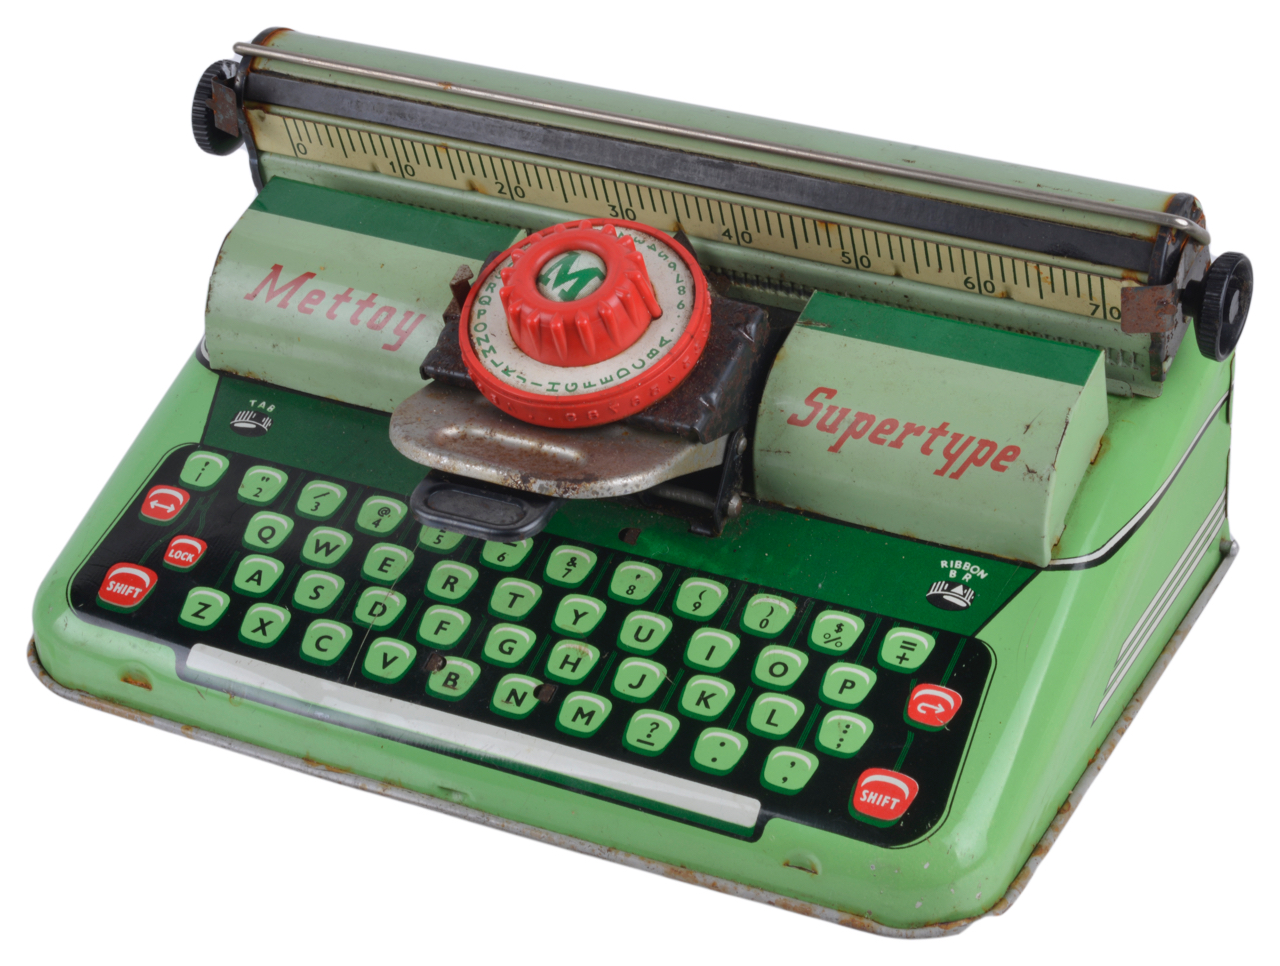 A 1950s Mettoy Supertype tinplate toy typewriter